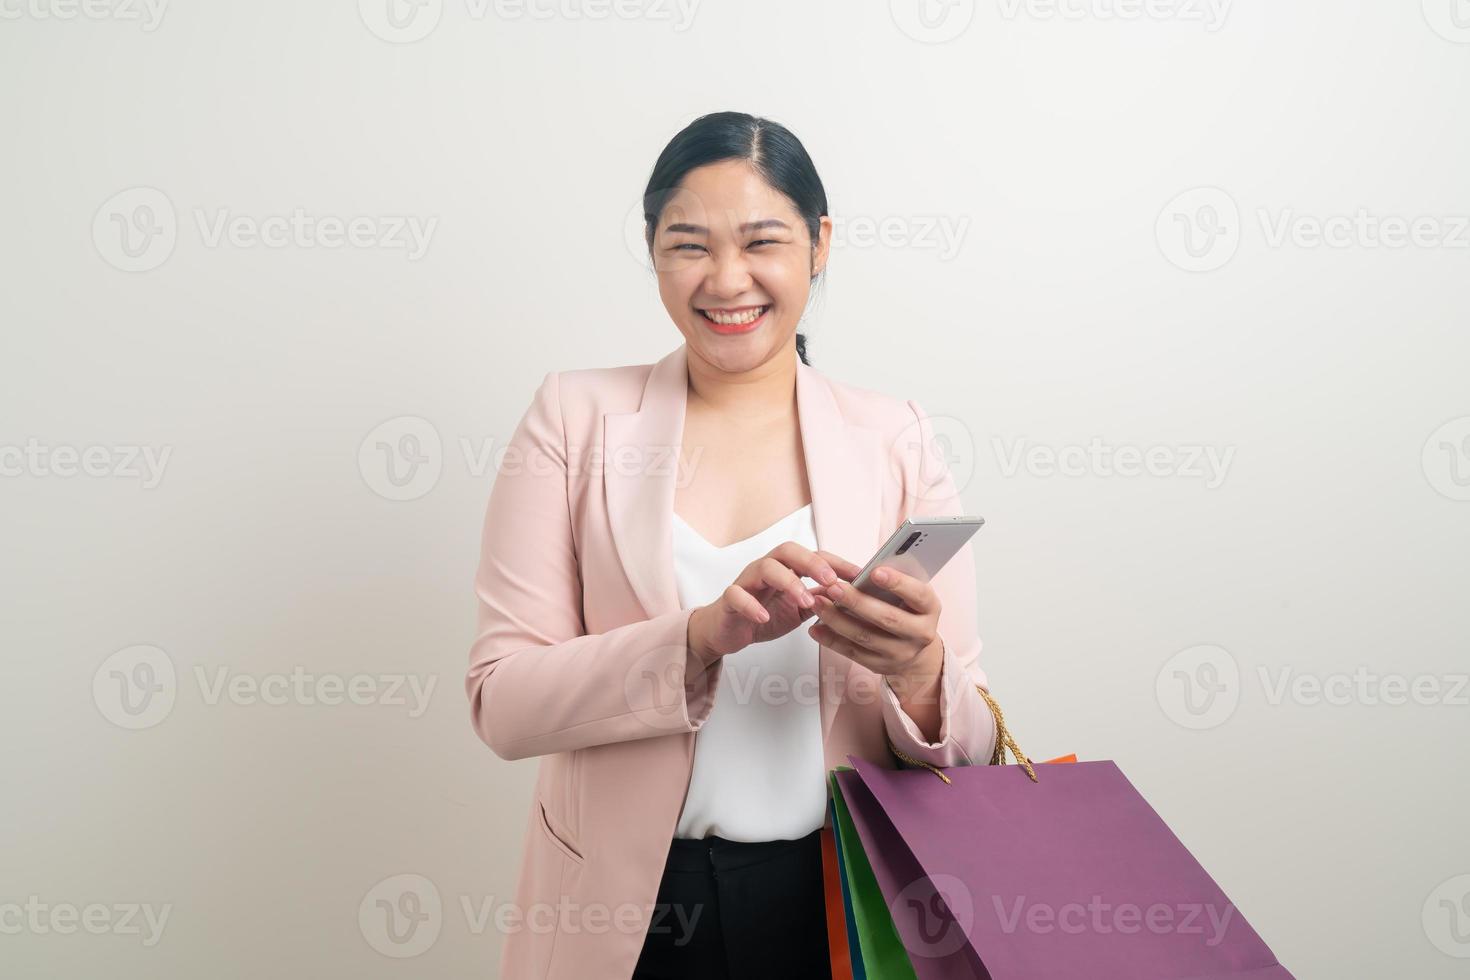 Asian woman using smartphone with shopping bag on hand photo